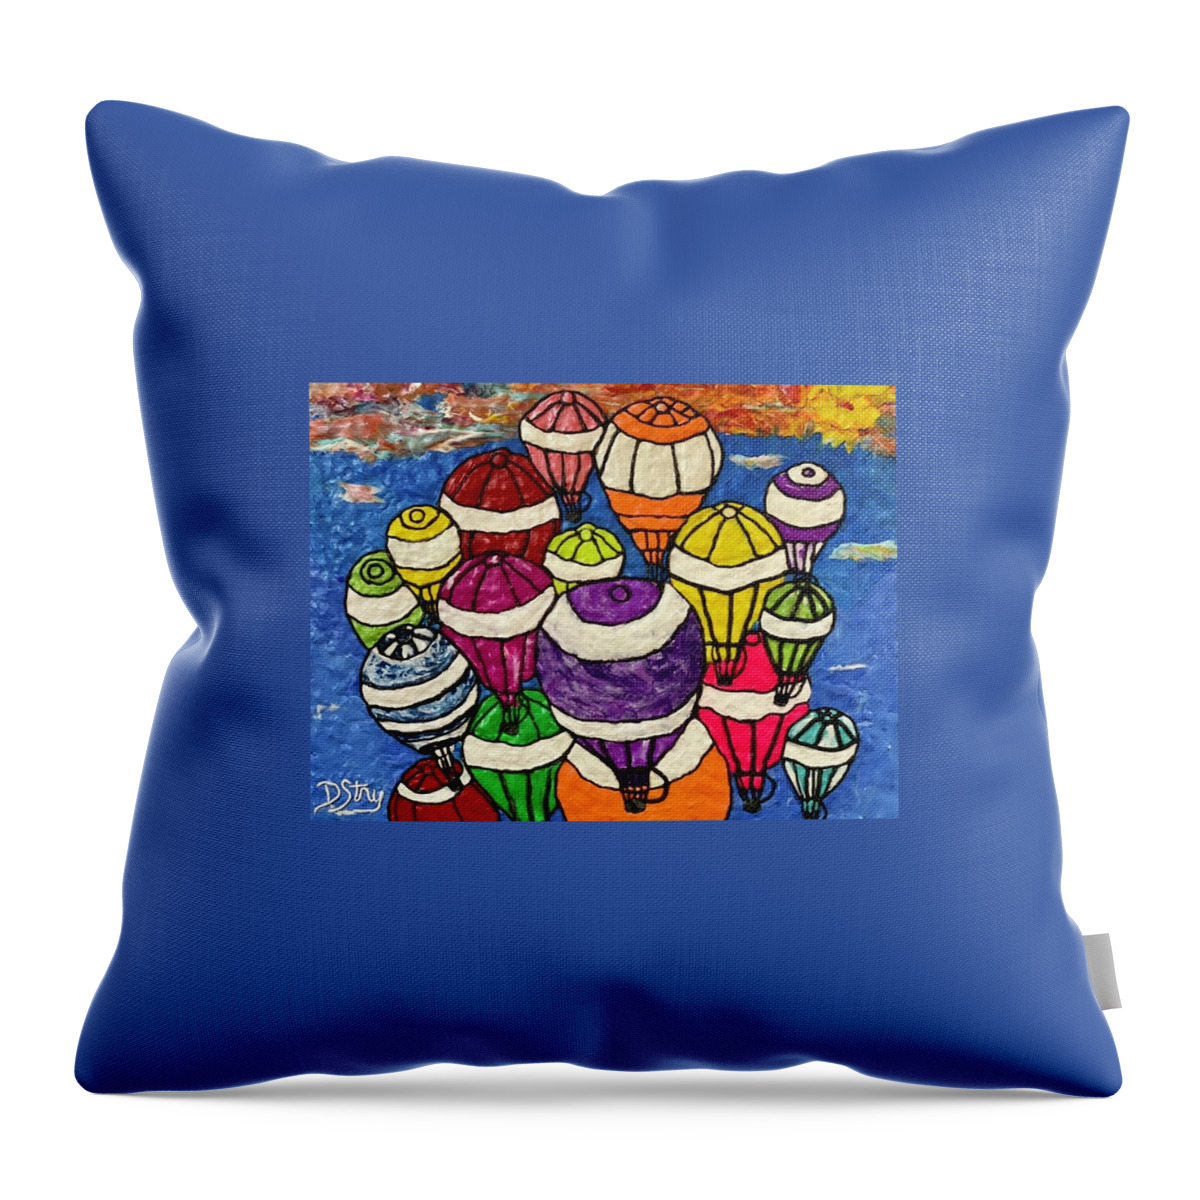  Throw Pillow featuring the mixed media The Great Escape by Deborah Stanley